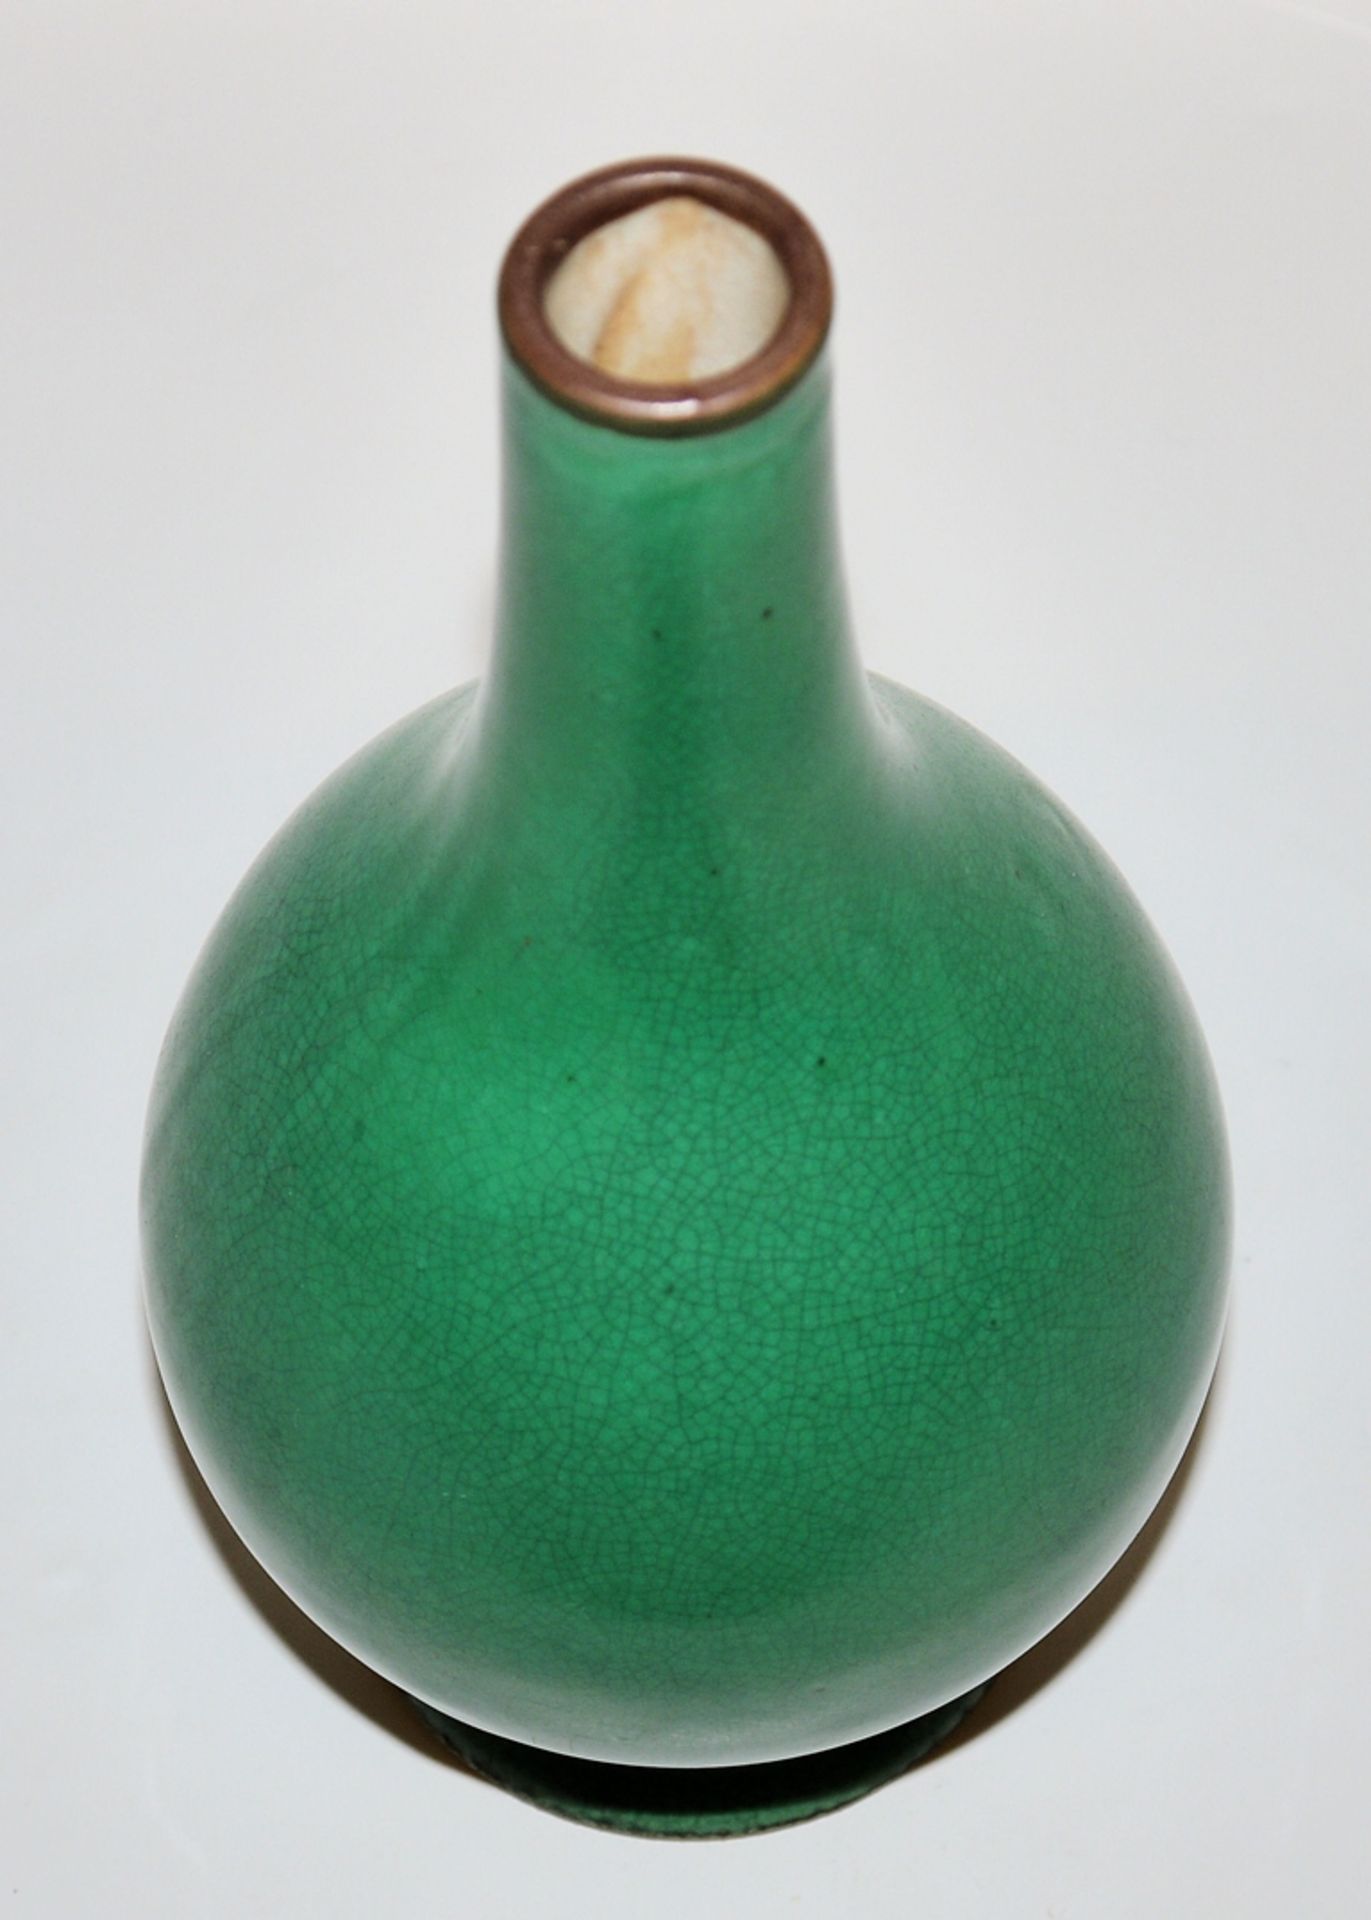 Bottle vase with apple-green glaze, late Qing period, China 19th century - Image 3 of 3